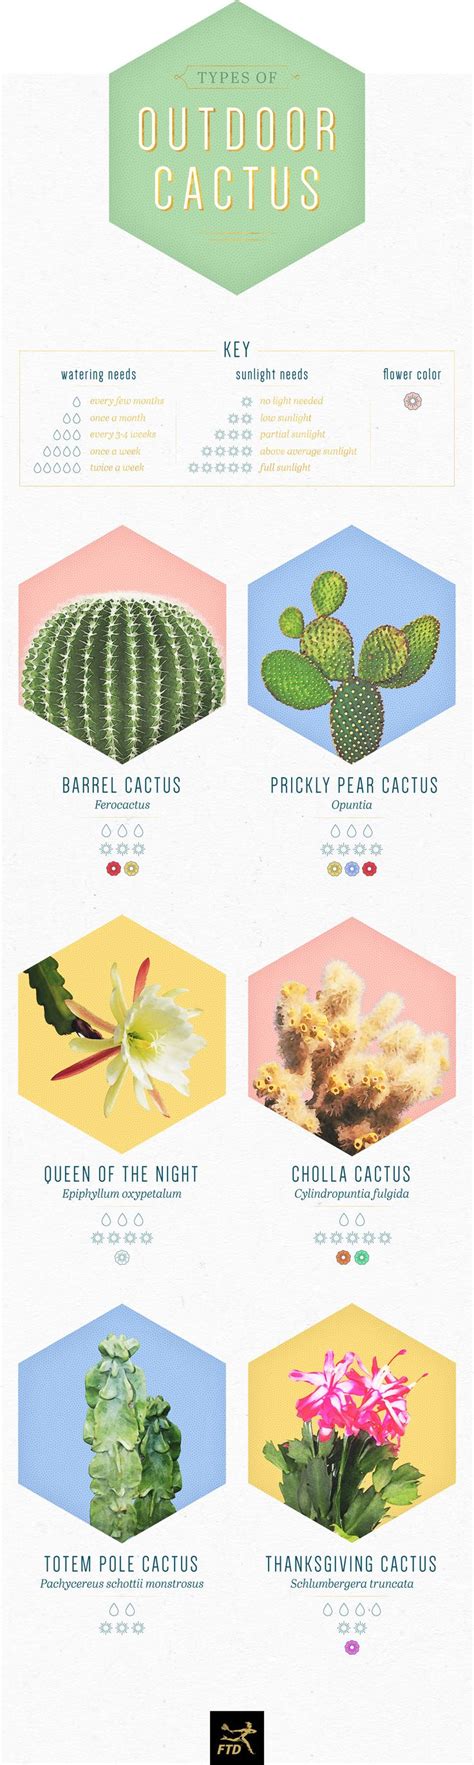 14 Types Of Cactus For Your Home And Garden Cactus Types